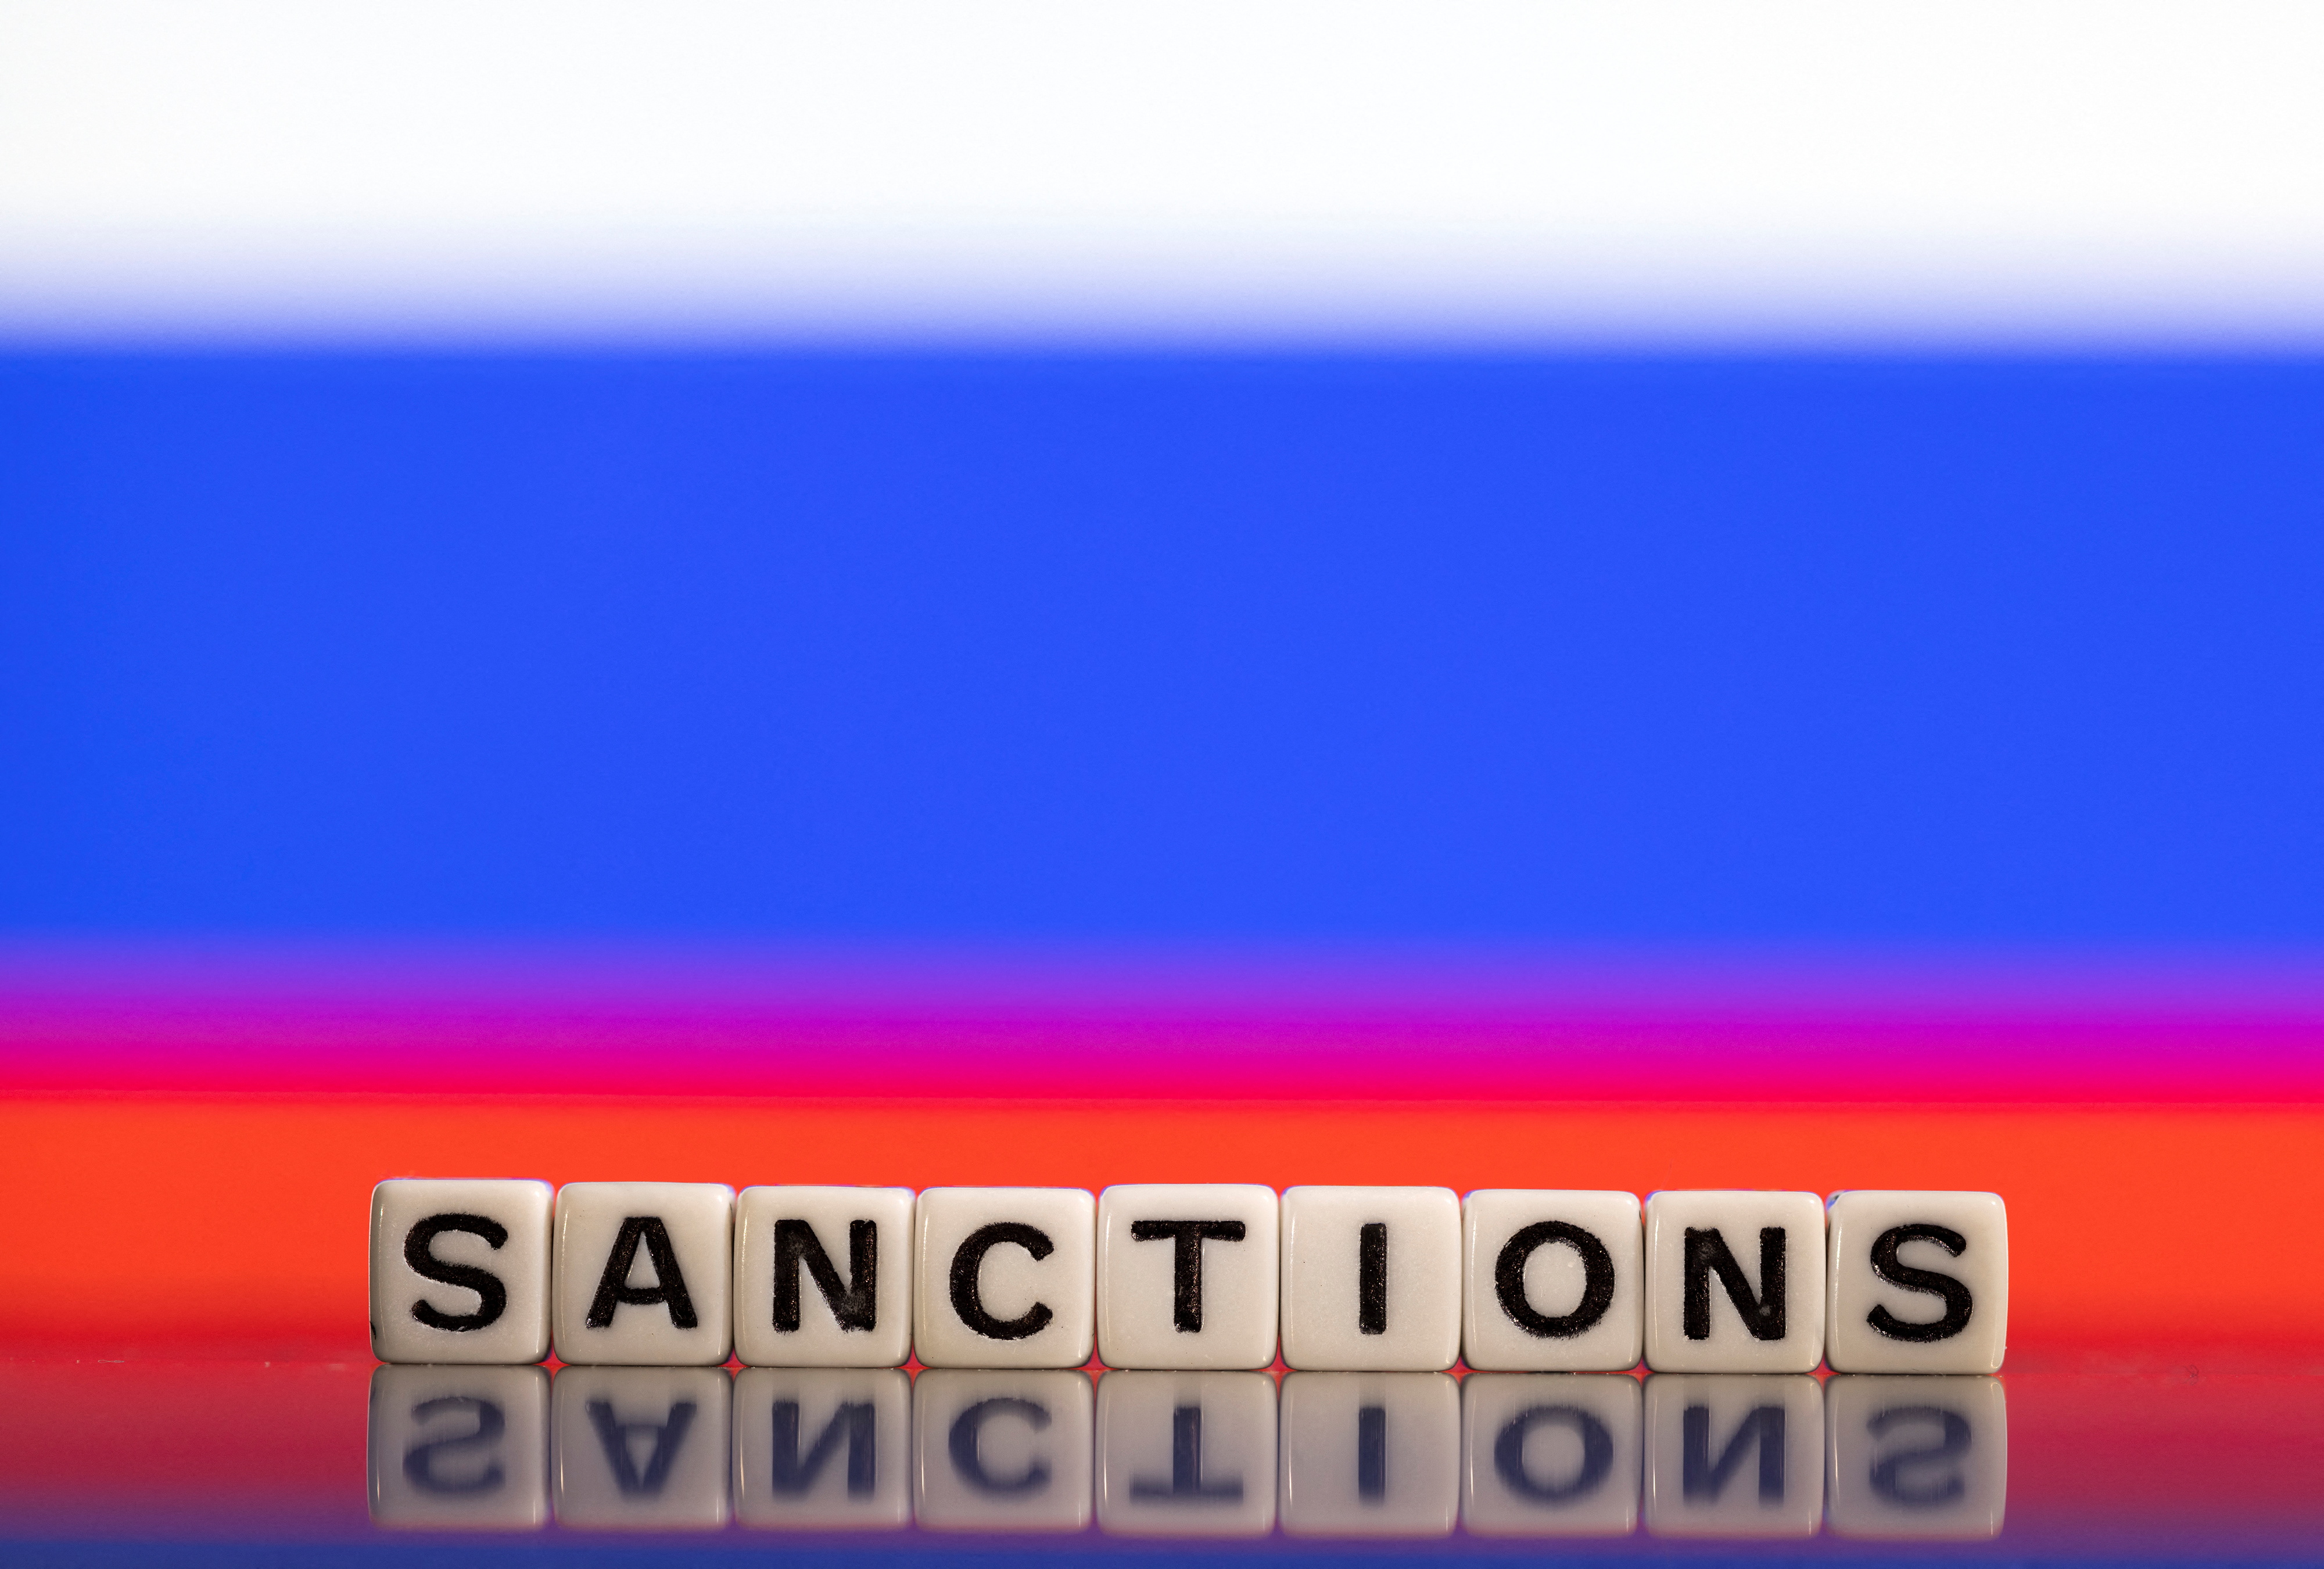 "Sanctions" in front of Russian flag colors